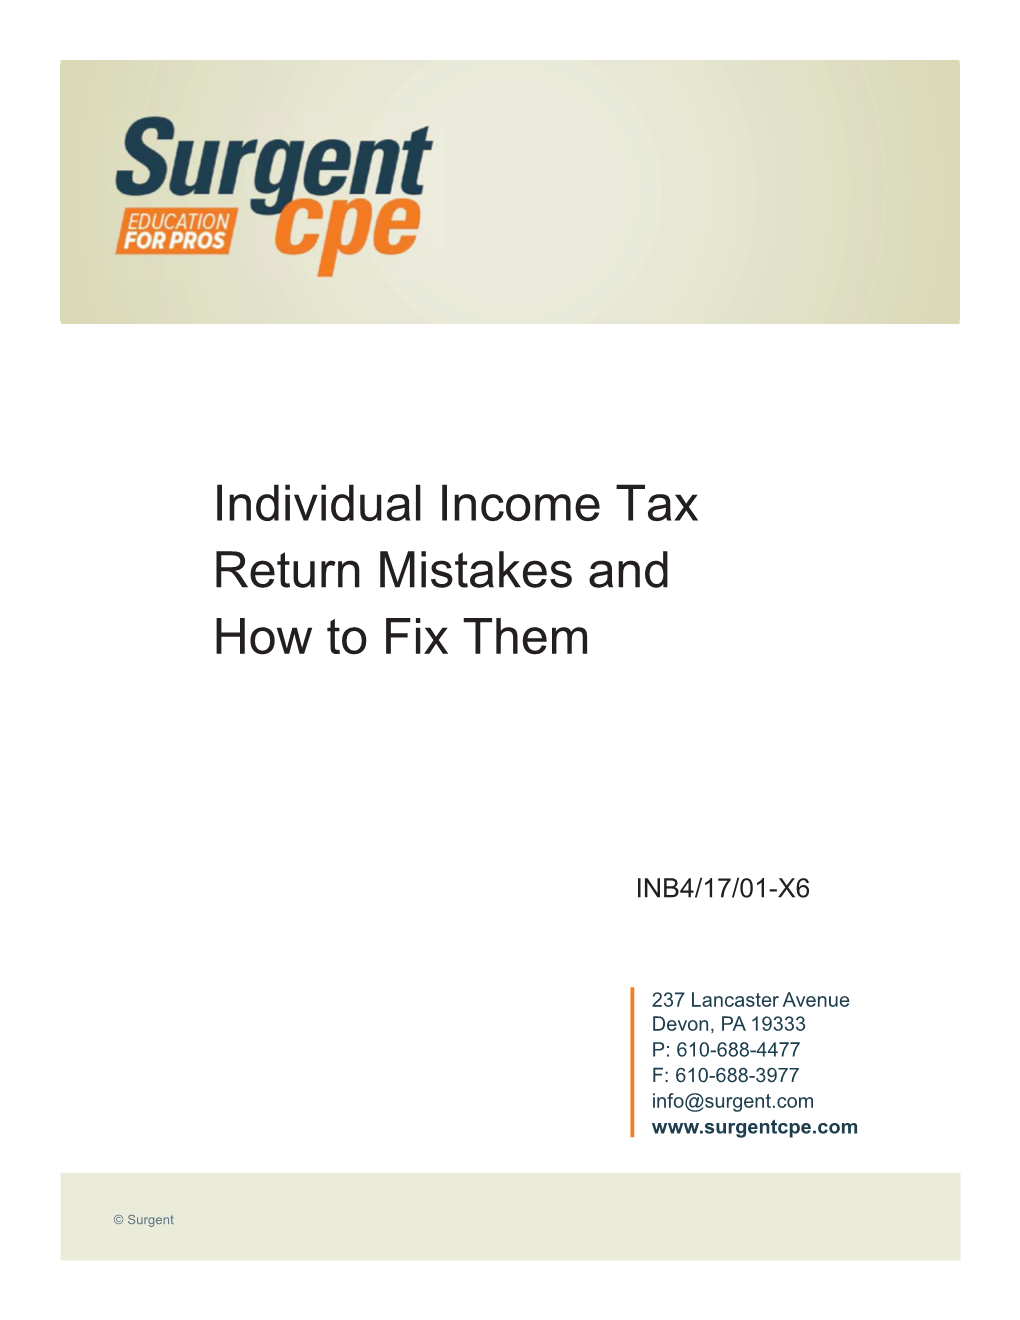 Individual Income Tax Return Mistakes and How to Fix Them